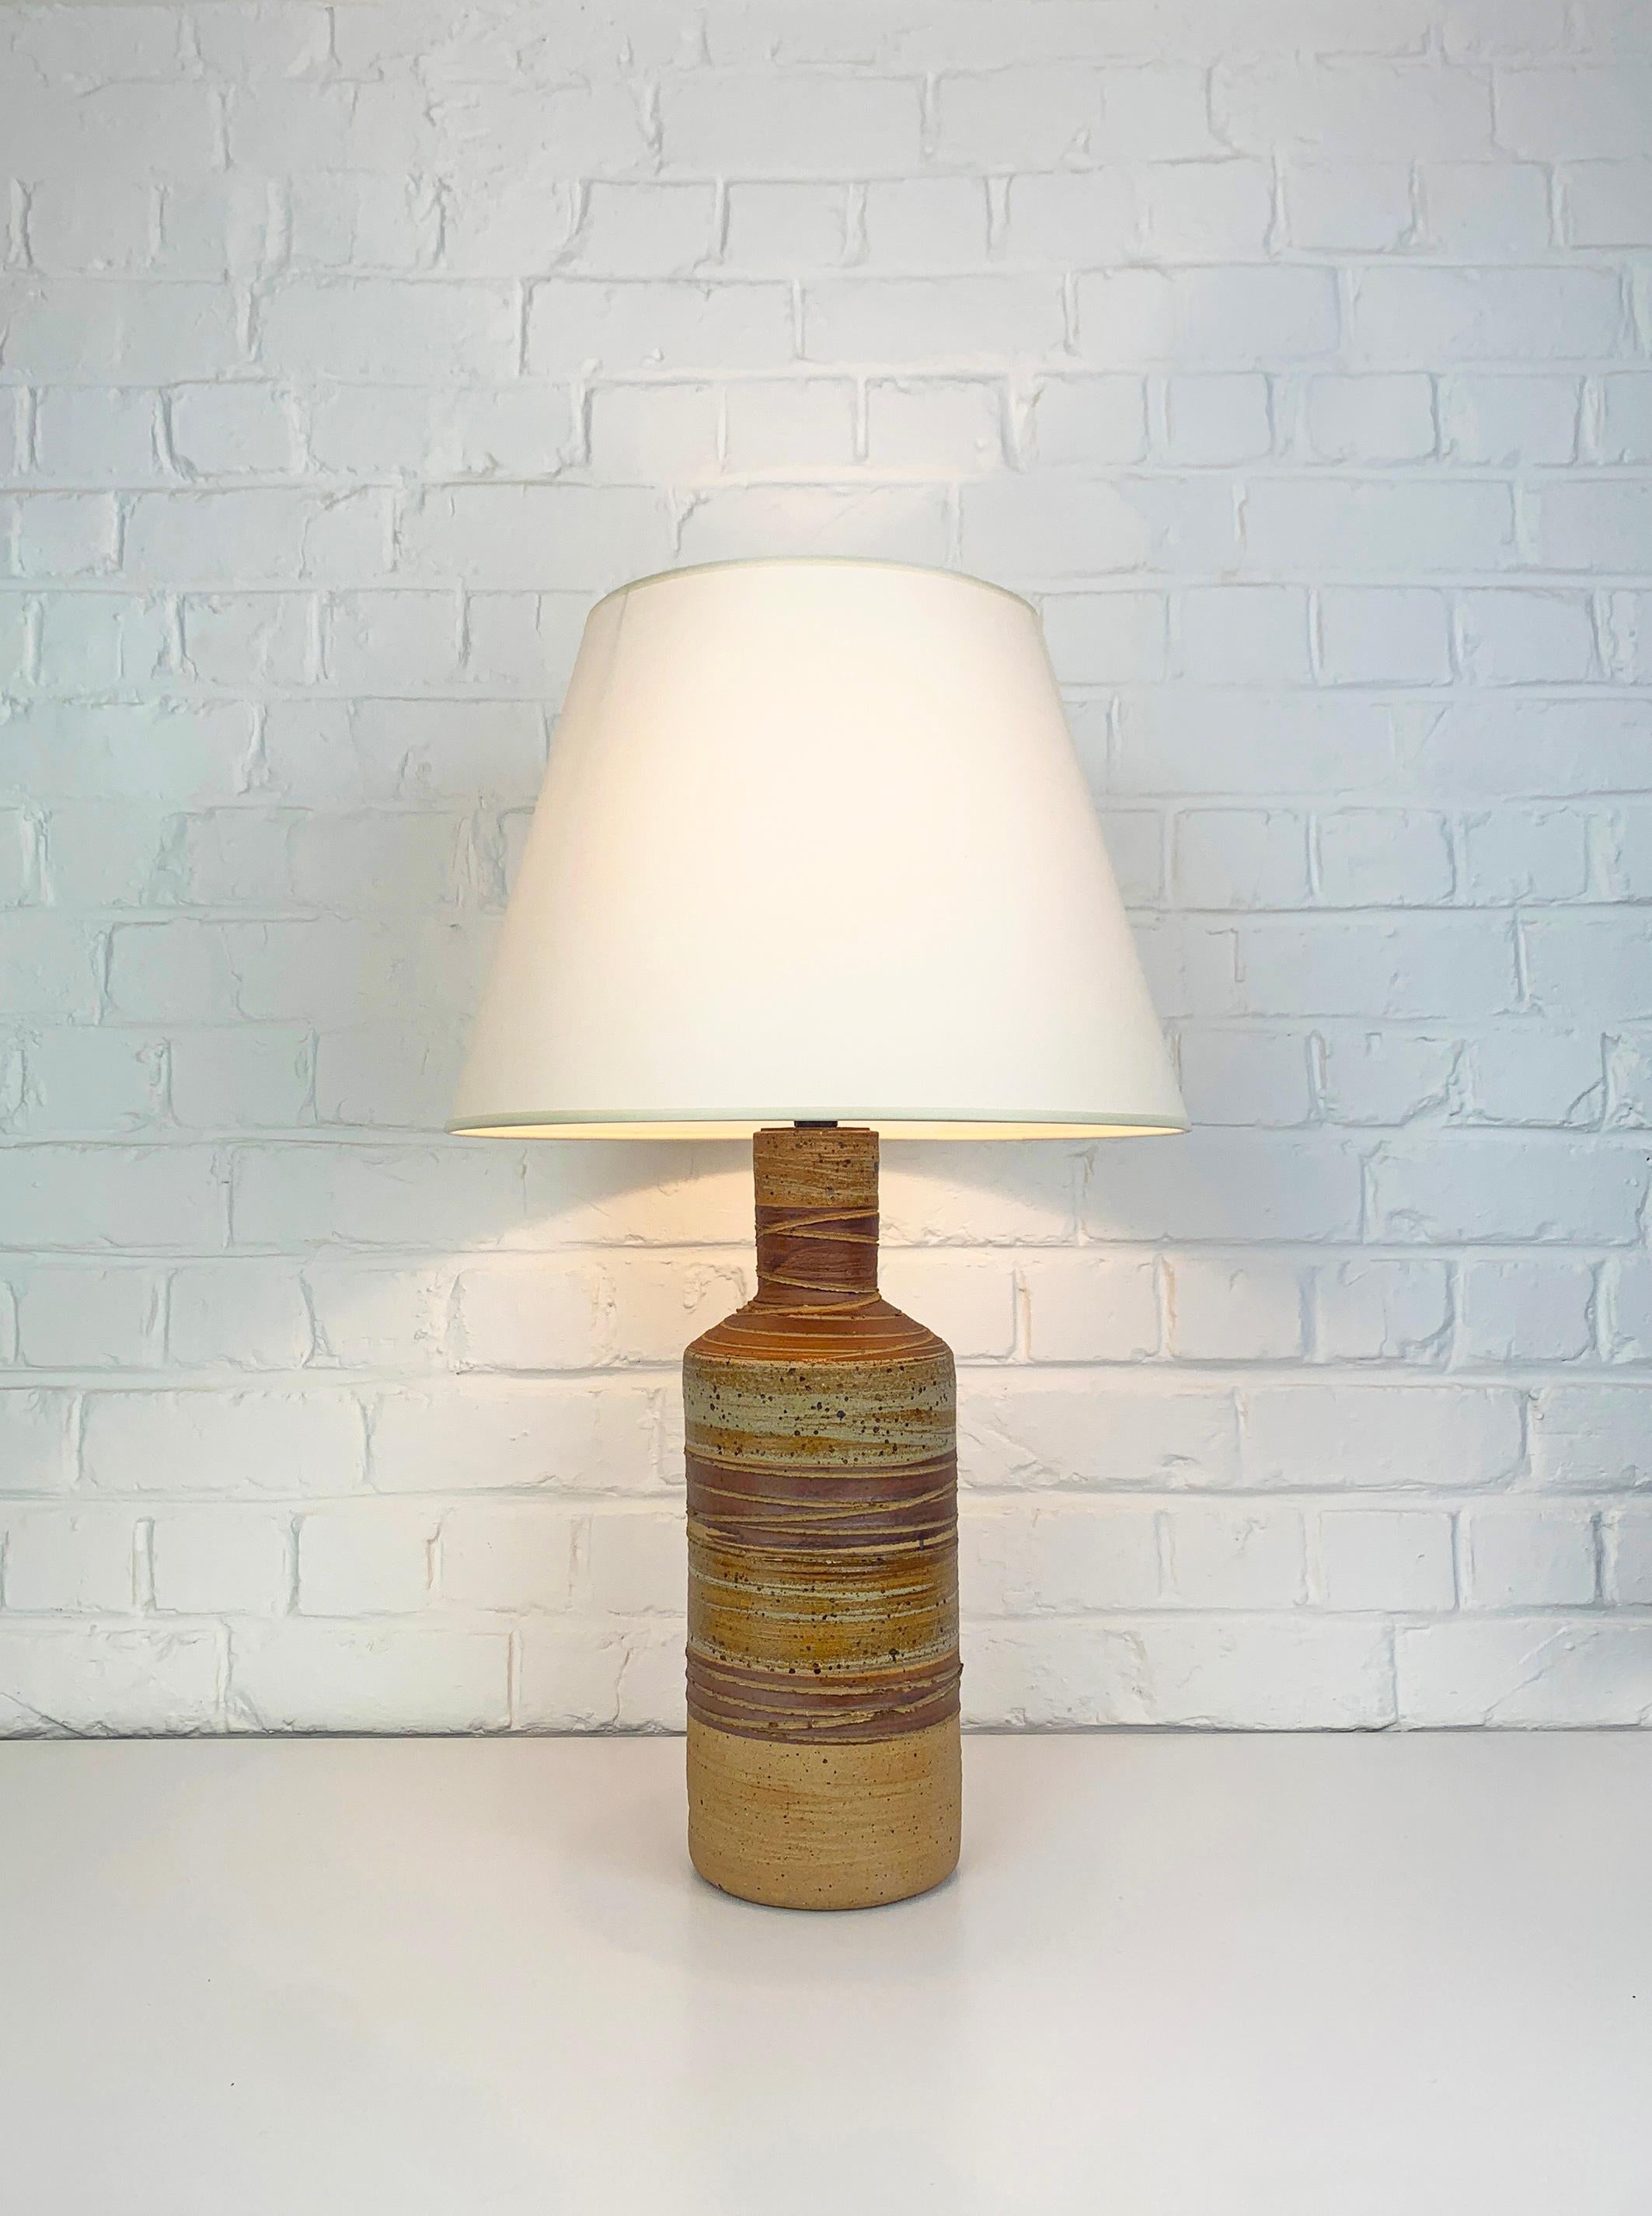 Rustic Table lamp created by Tue Poulsen (Denmark). Made 1970-80s in Tue Poulsen´s own studio.

The lamp base is made of chamotte clay and decorated with stripes in brown-beige earth colors. The chamotte clay gives a natural and living surface.